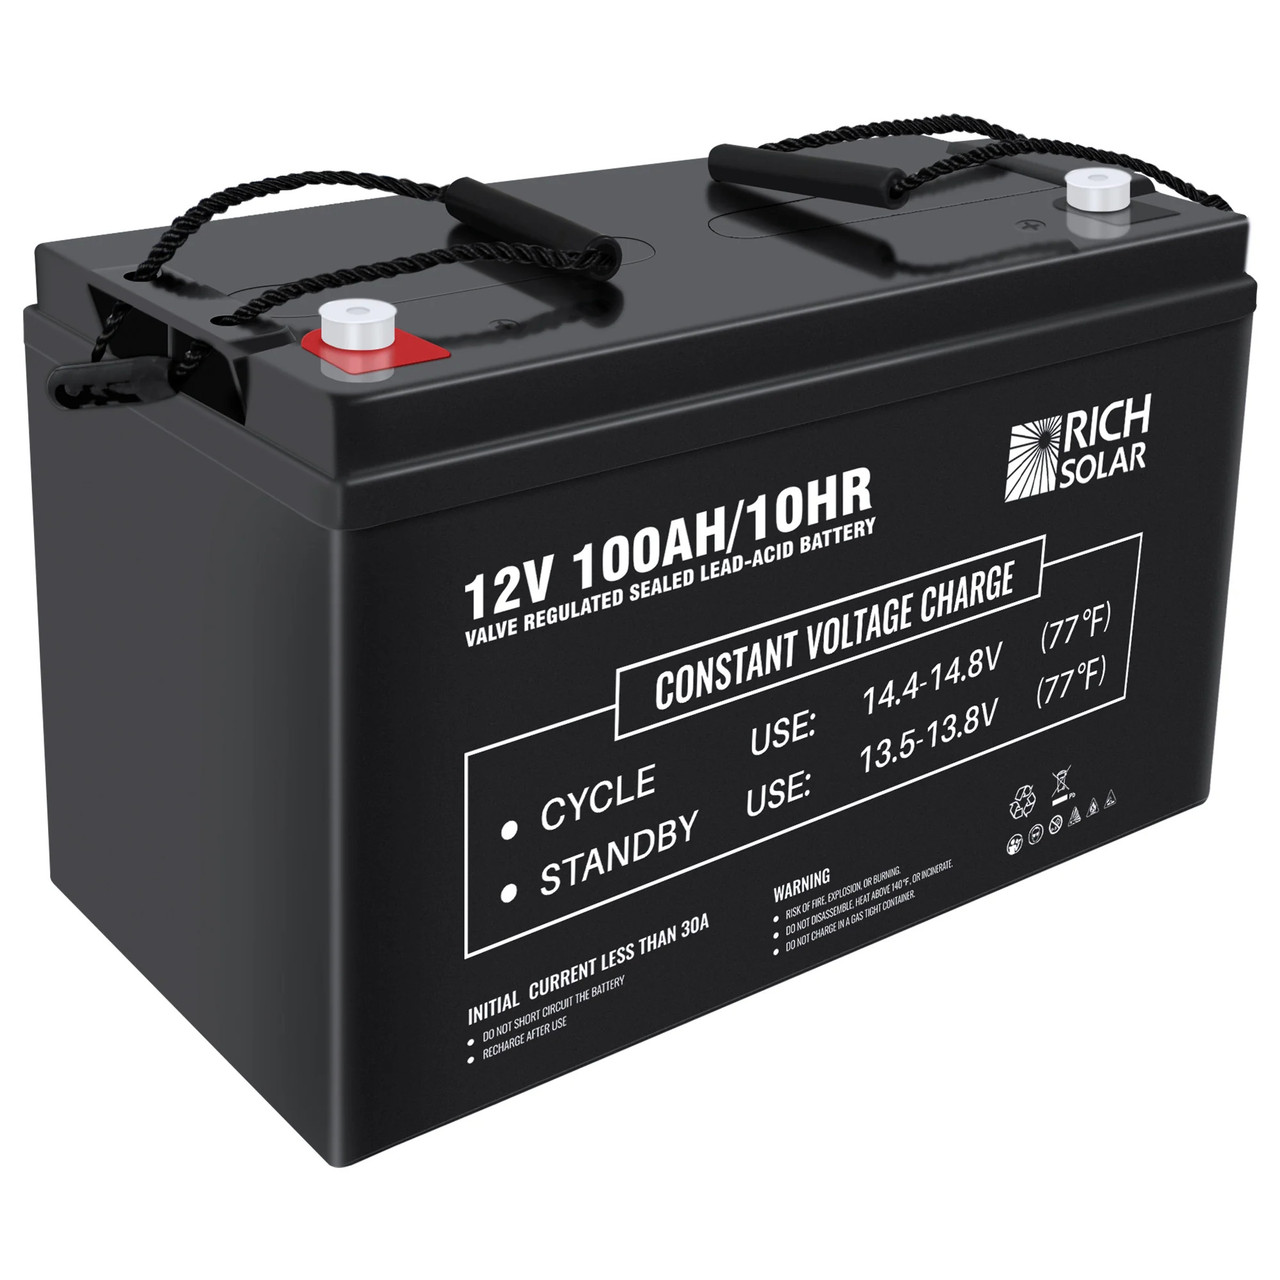 VEVOR Deep Cycle Battery, 12V 100 AH, AGM Marine Rechargeable Battery, High  Self-Discharge Rate 800A Discharge Current, for RV Solar Marine Off-Grid  Applications UPS Backup Power System, UL Certified